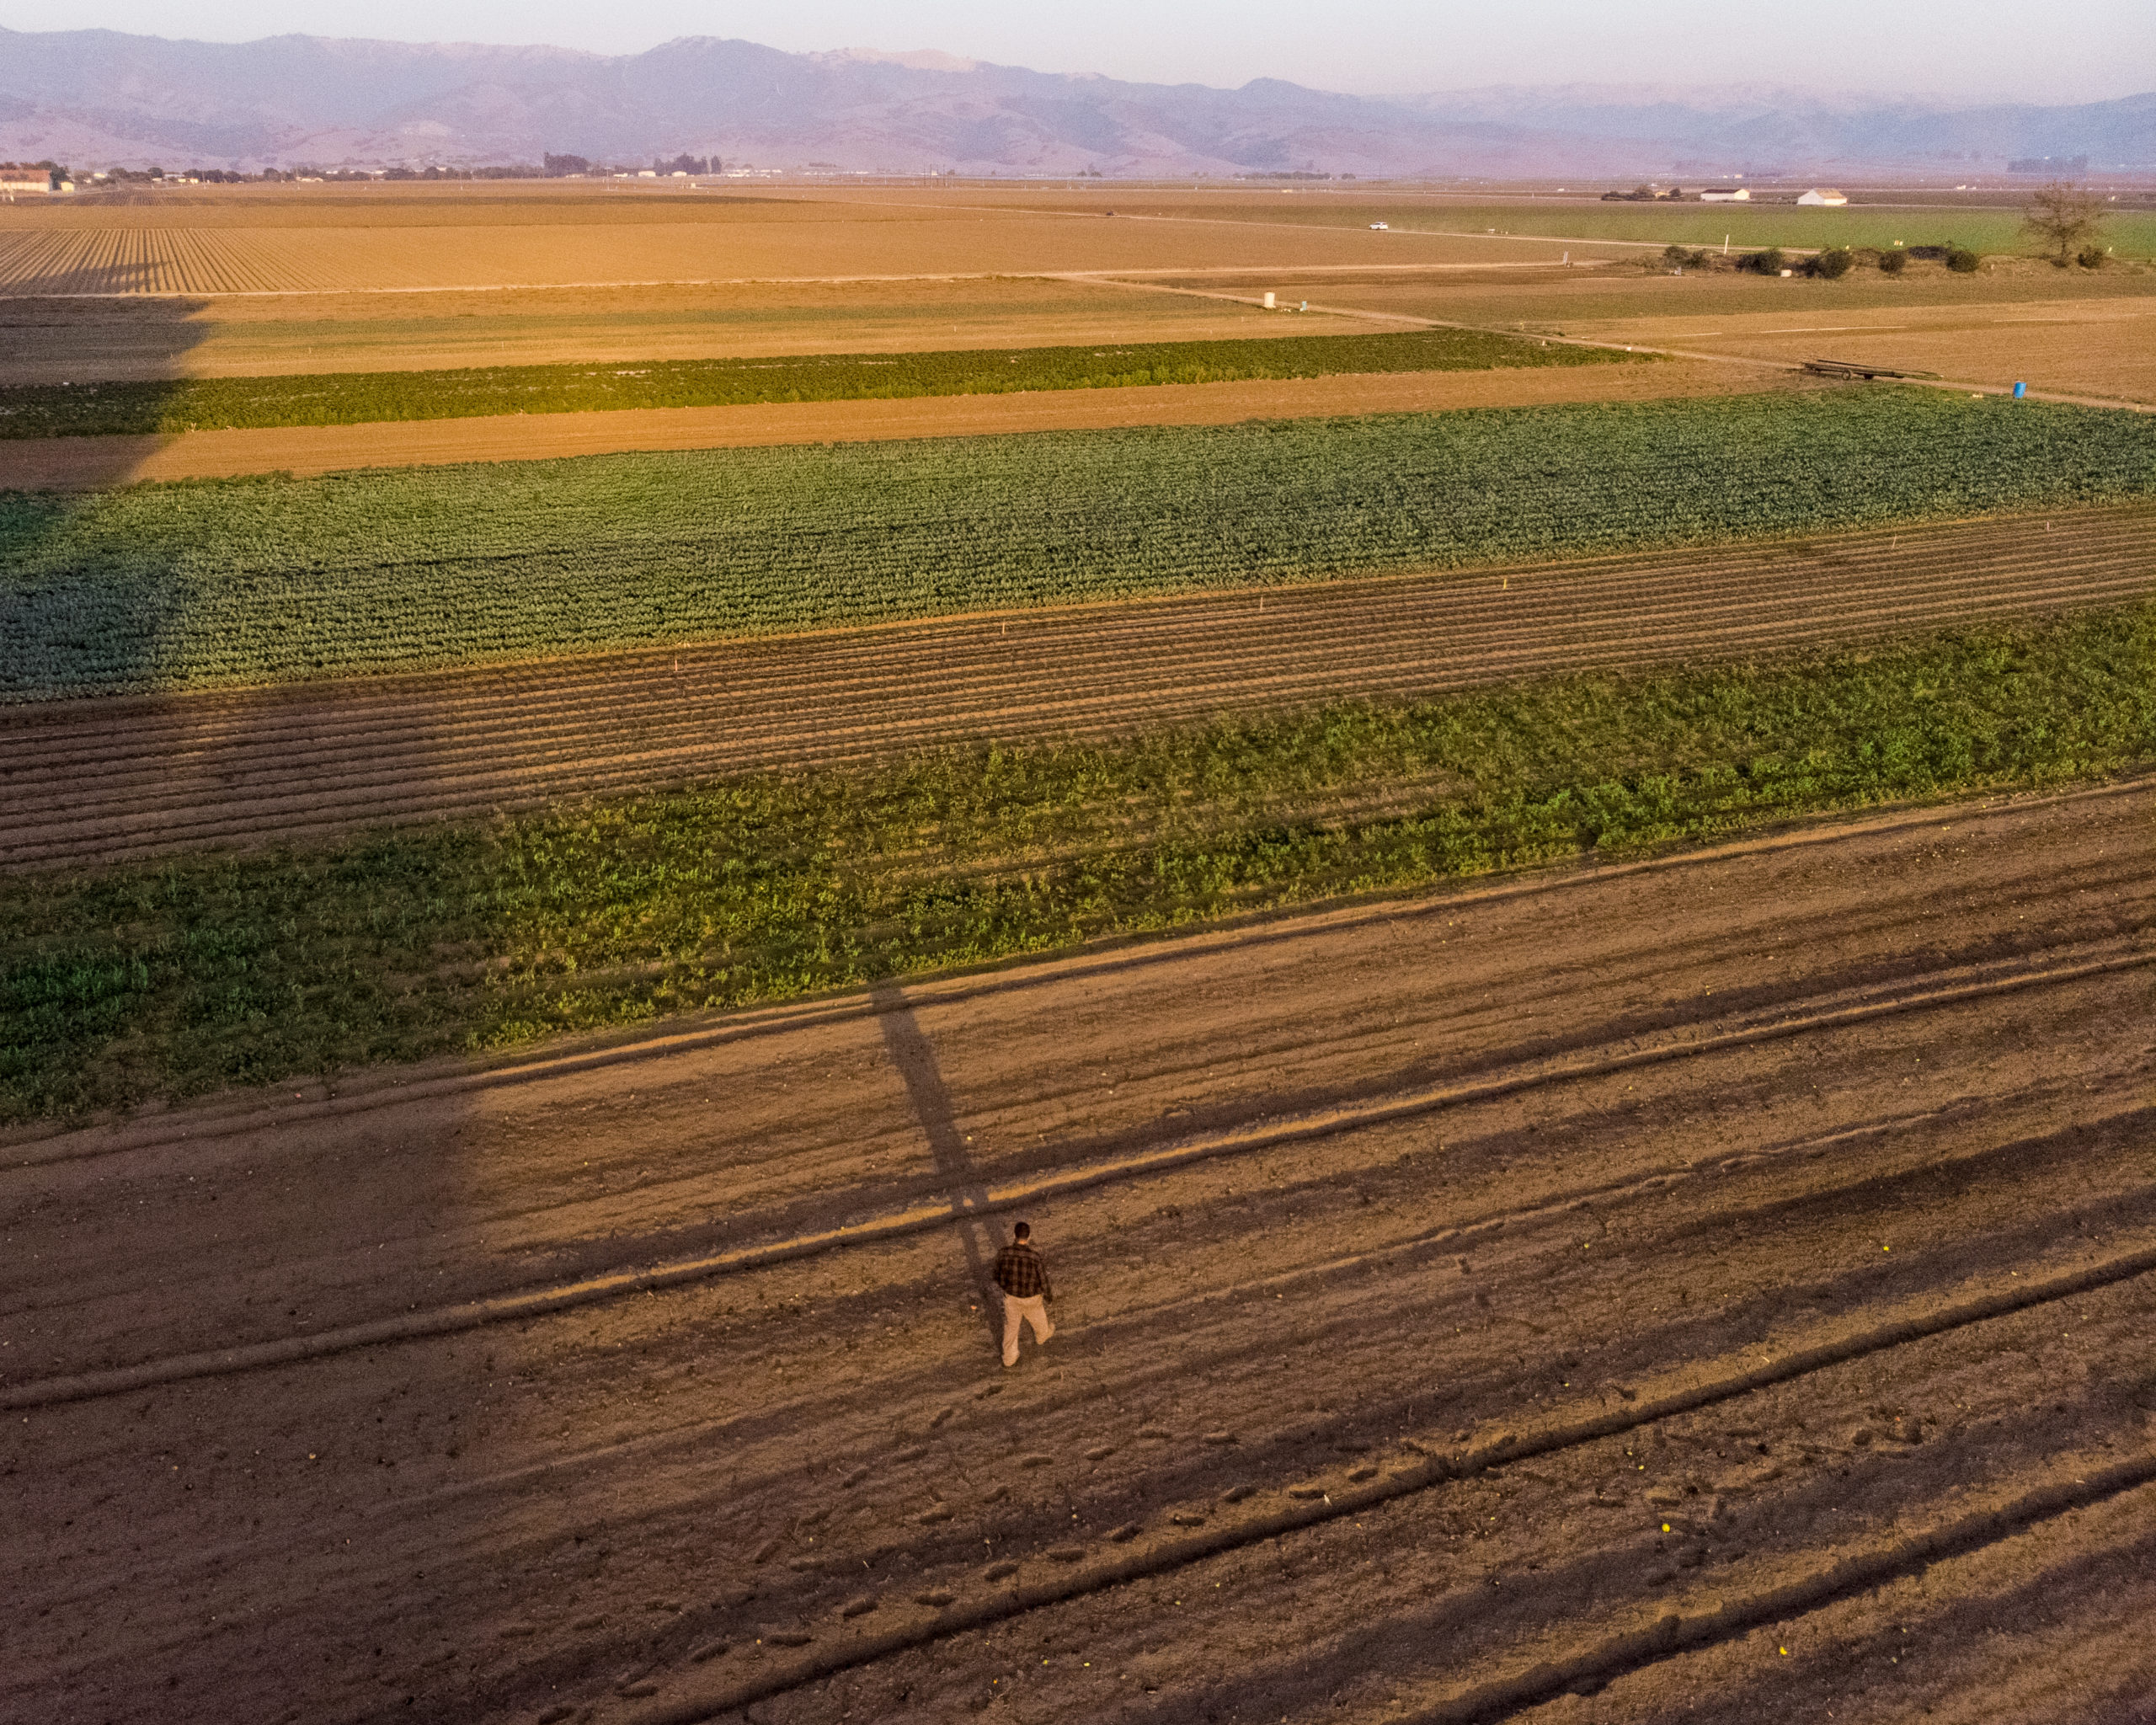 Farmworker walks across the land in Salinas, California. Photo by Lance Cheung from the US Department of Agriculture.